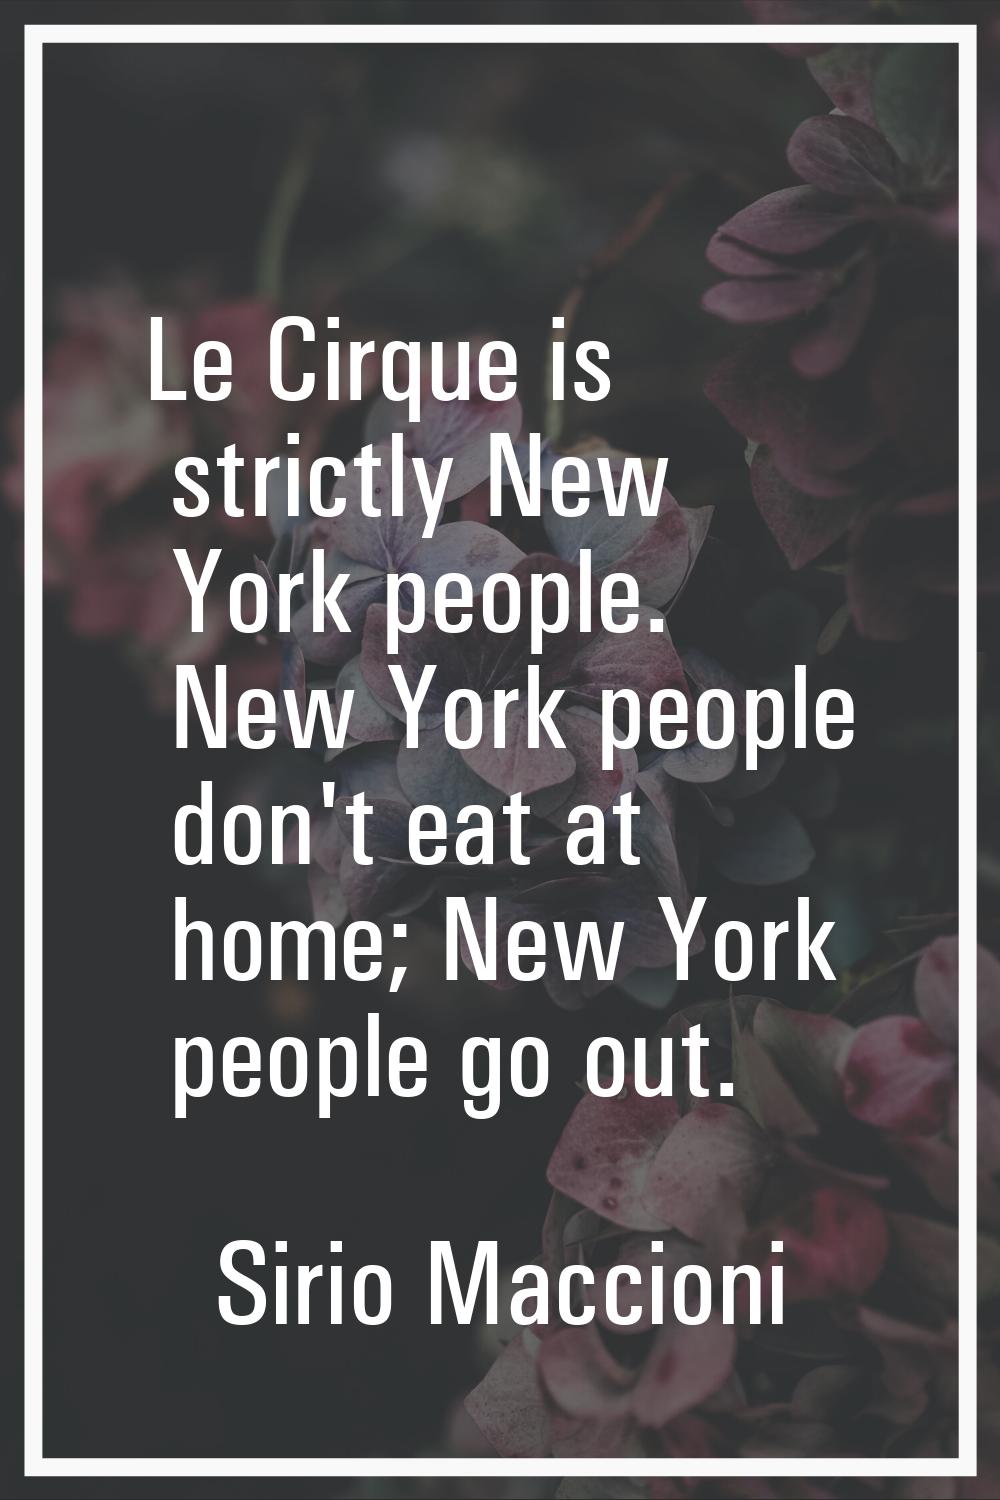 Le Cirque is strictly New York people. New York people don't eat at home; New York people go out.